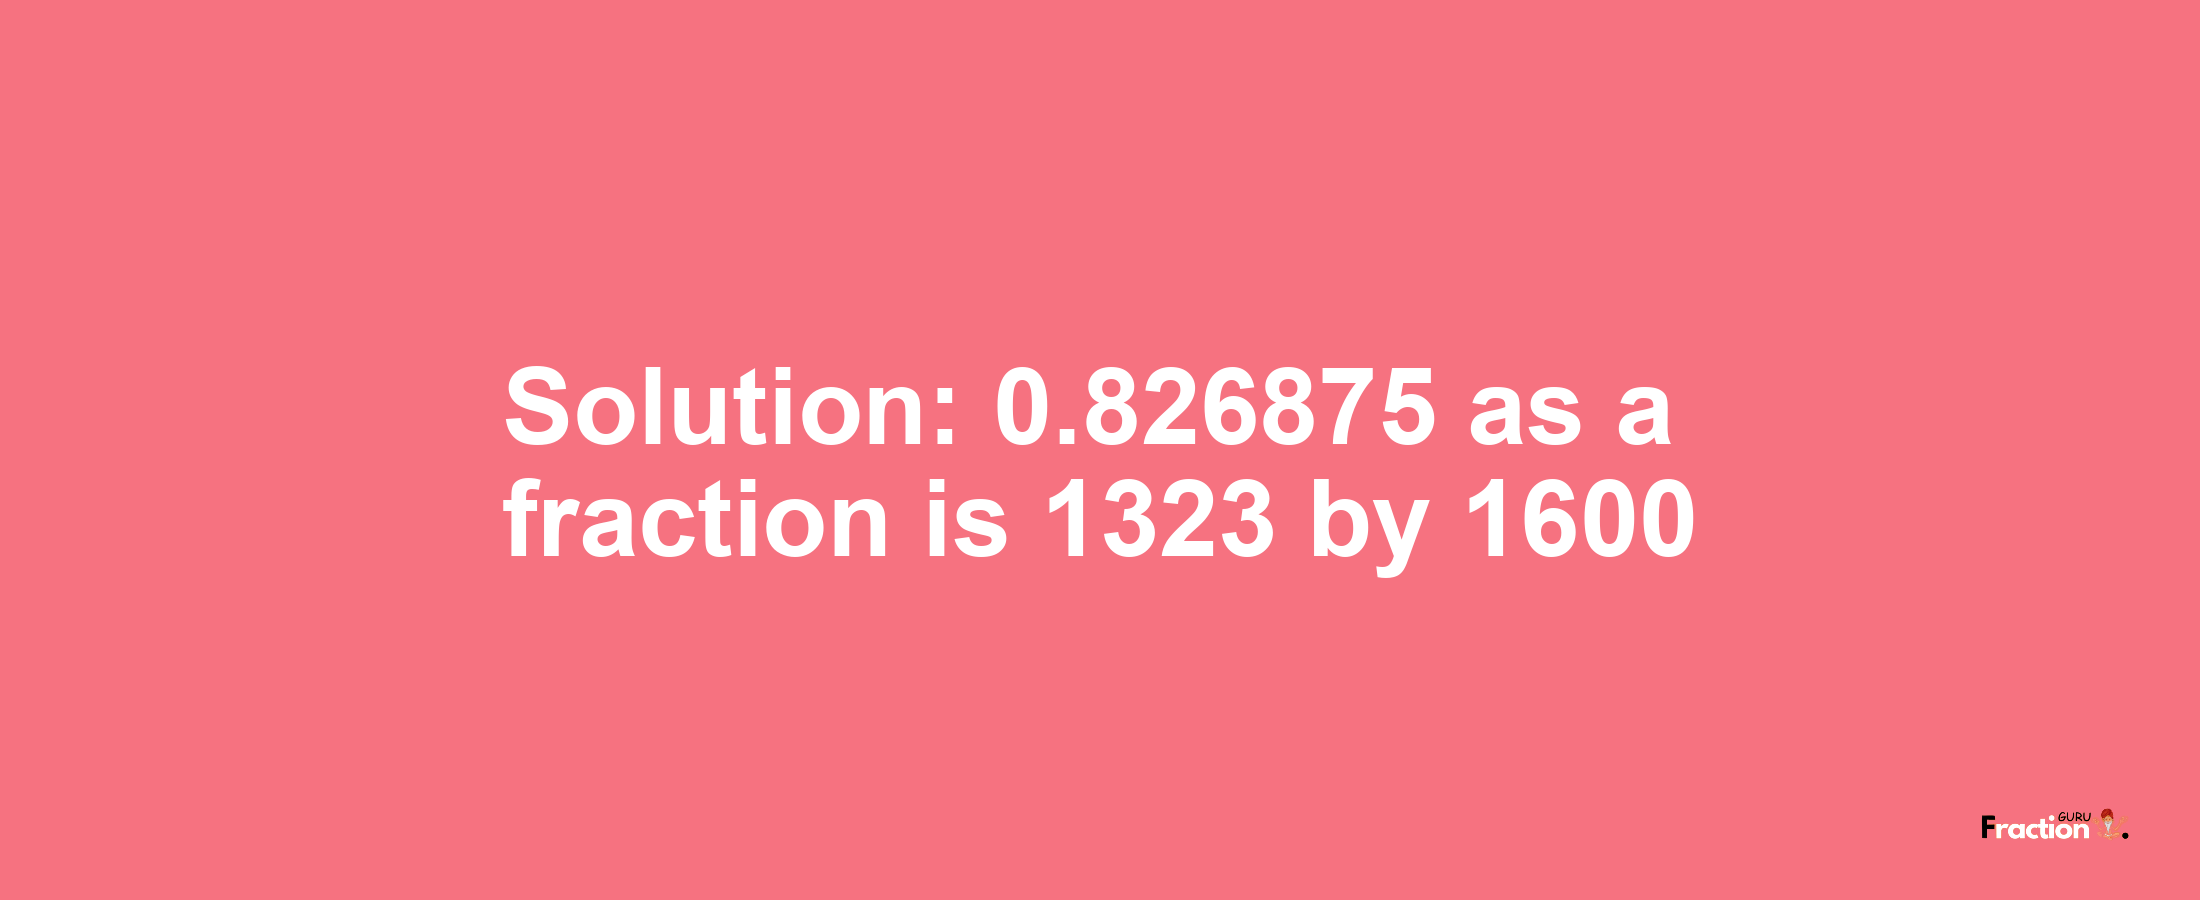 Solution:0.826875 as a fraction is 1323/1600